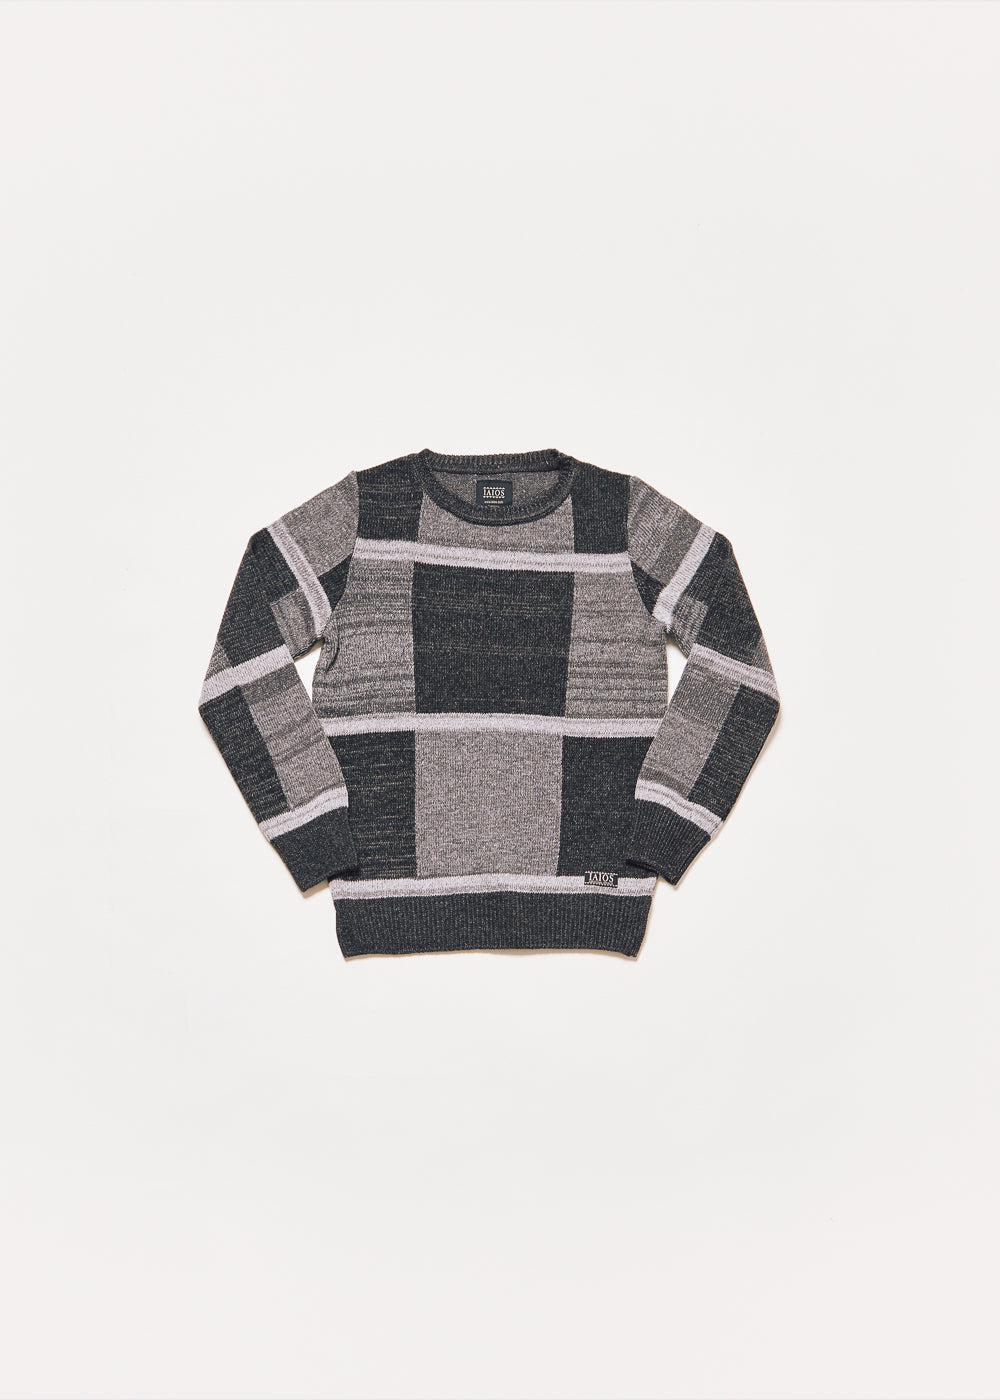 Women's or unisex knitted sweater in gray tones. It is a fairly large gray and black squares. 